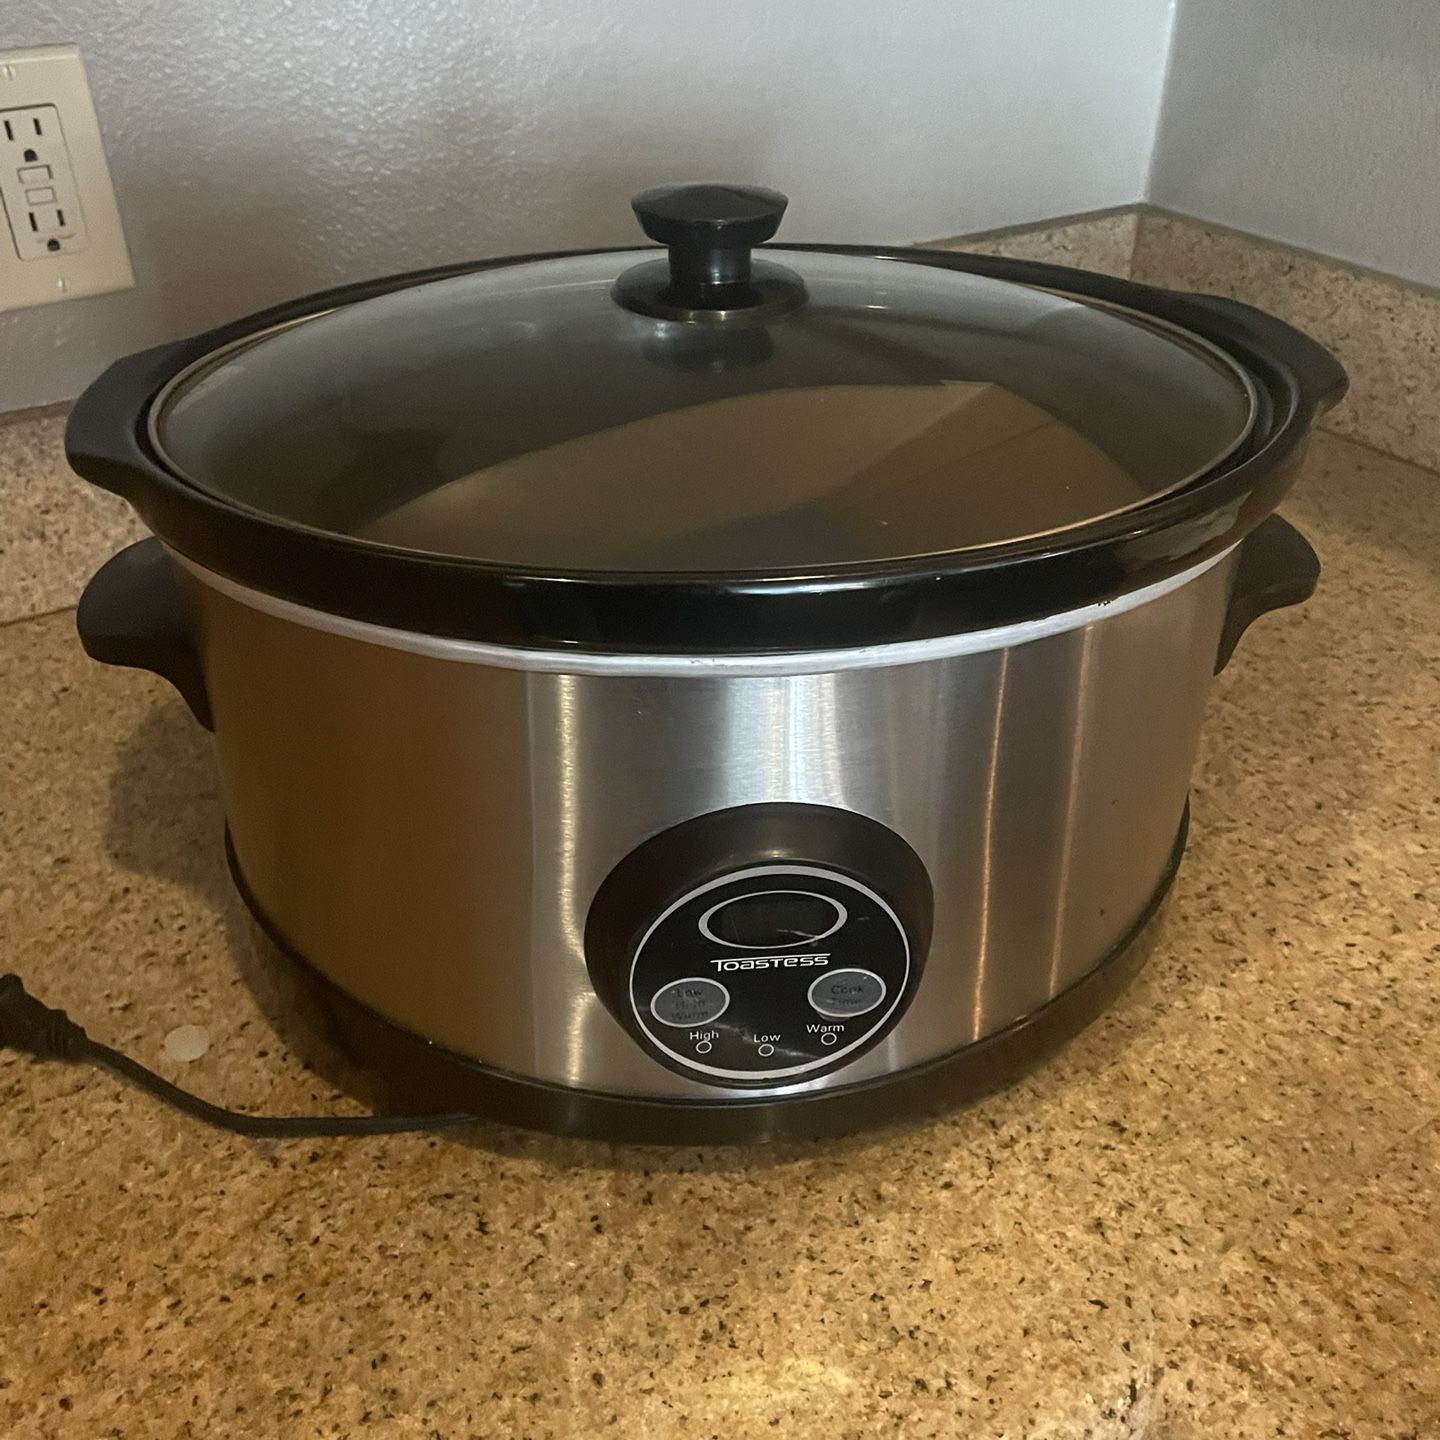 One of the most popular Crock-Pot slow cookers on  is on sale for $15